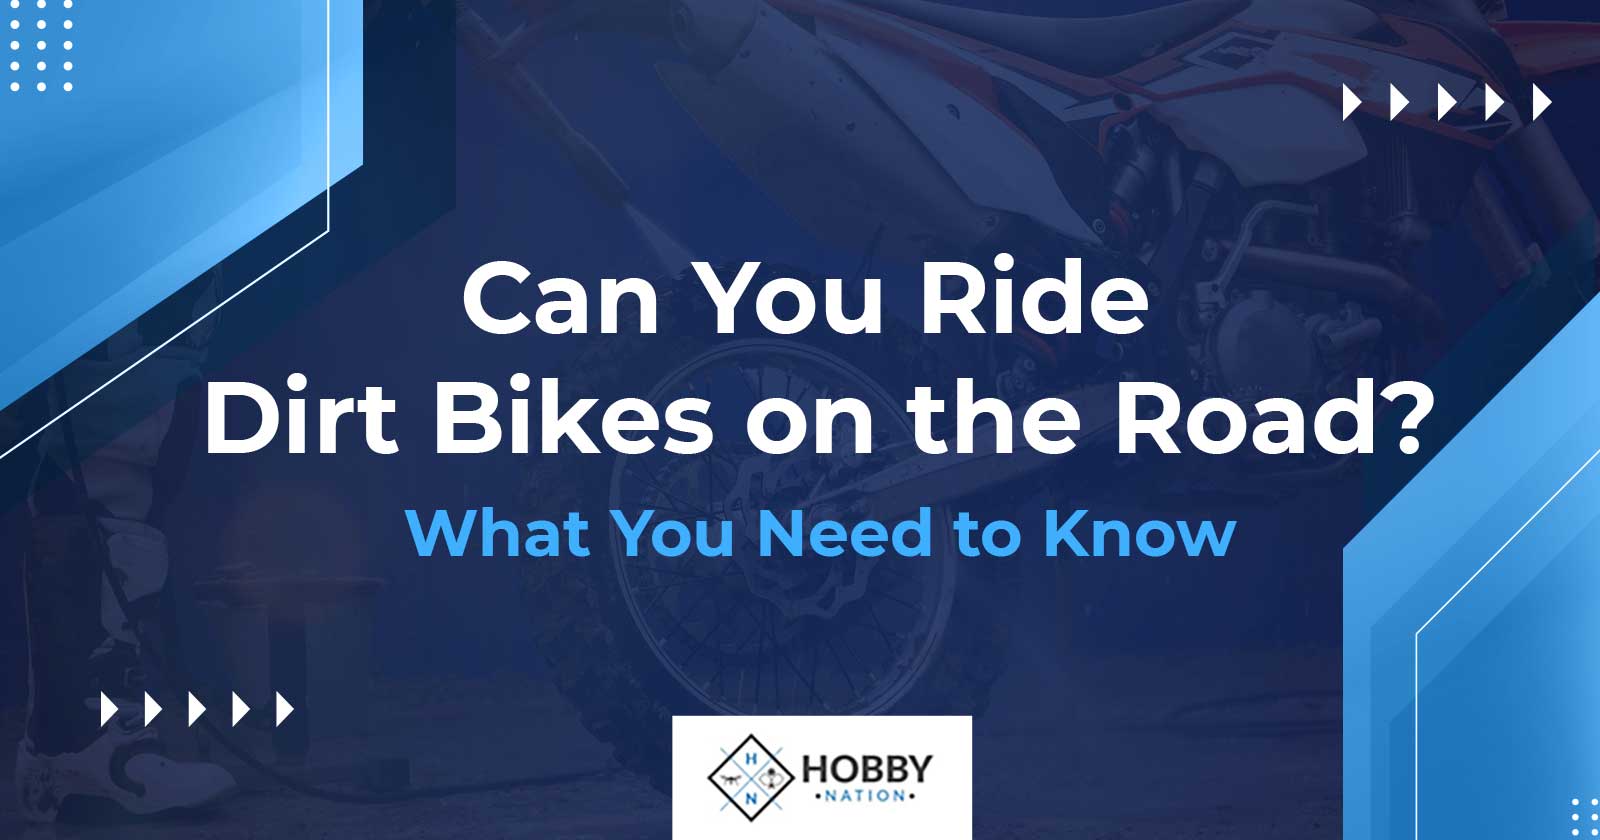 Can You Ride Dirt Bikes on the Road? What You Need to Know